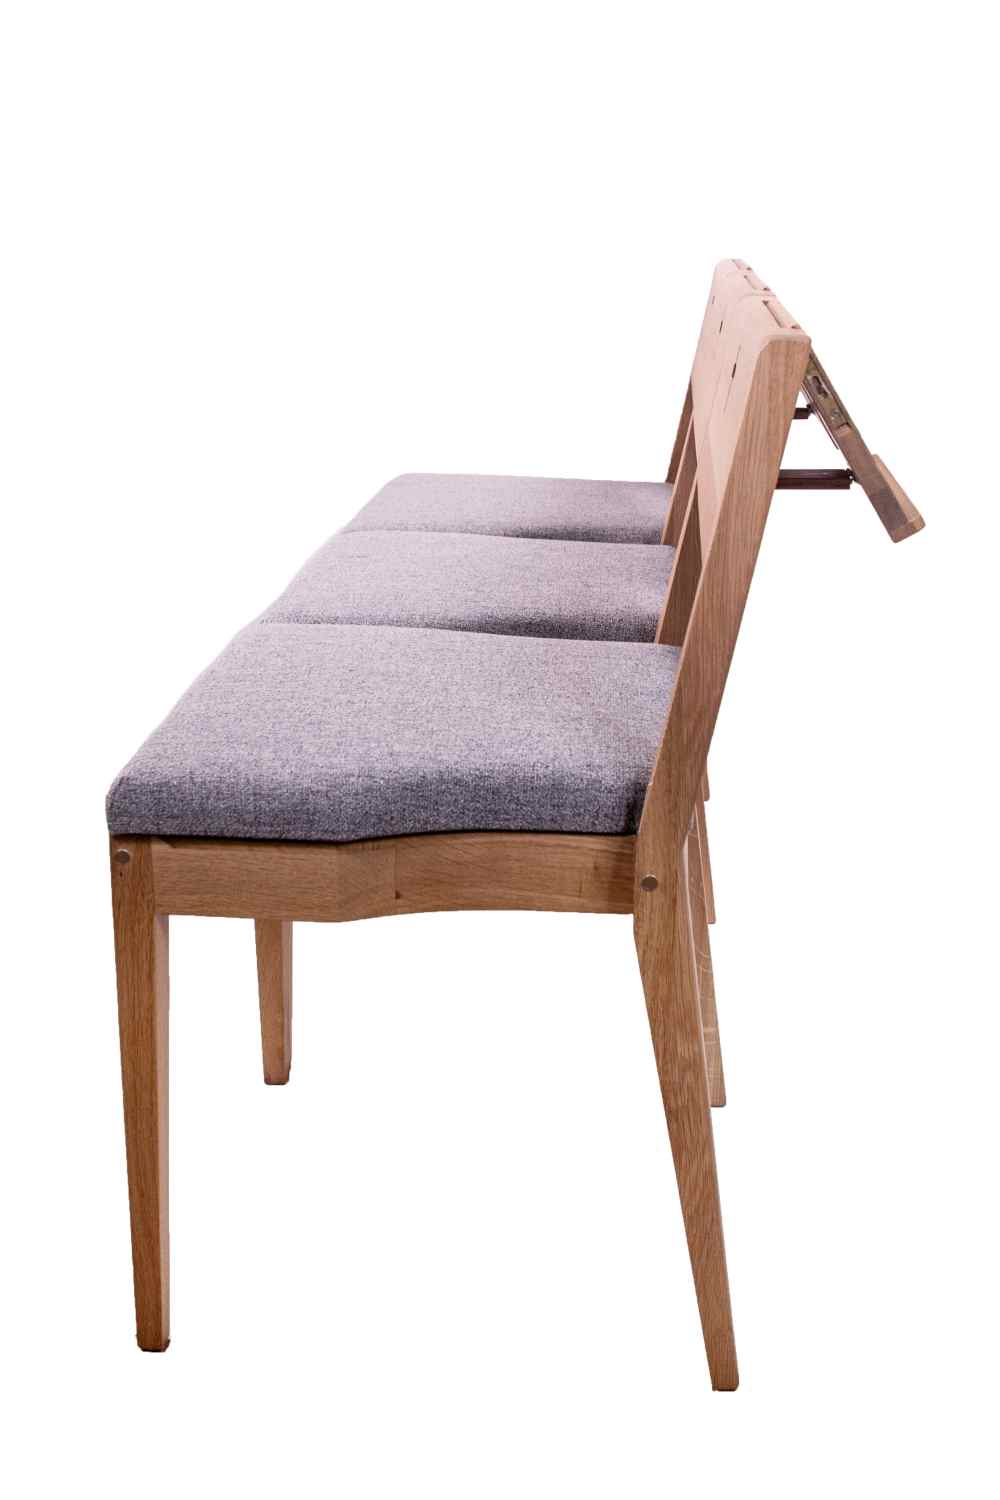 church chairs - modern bench seating. Made in Slovakia.